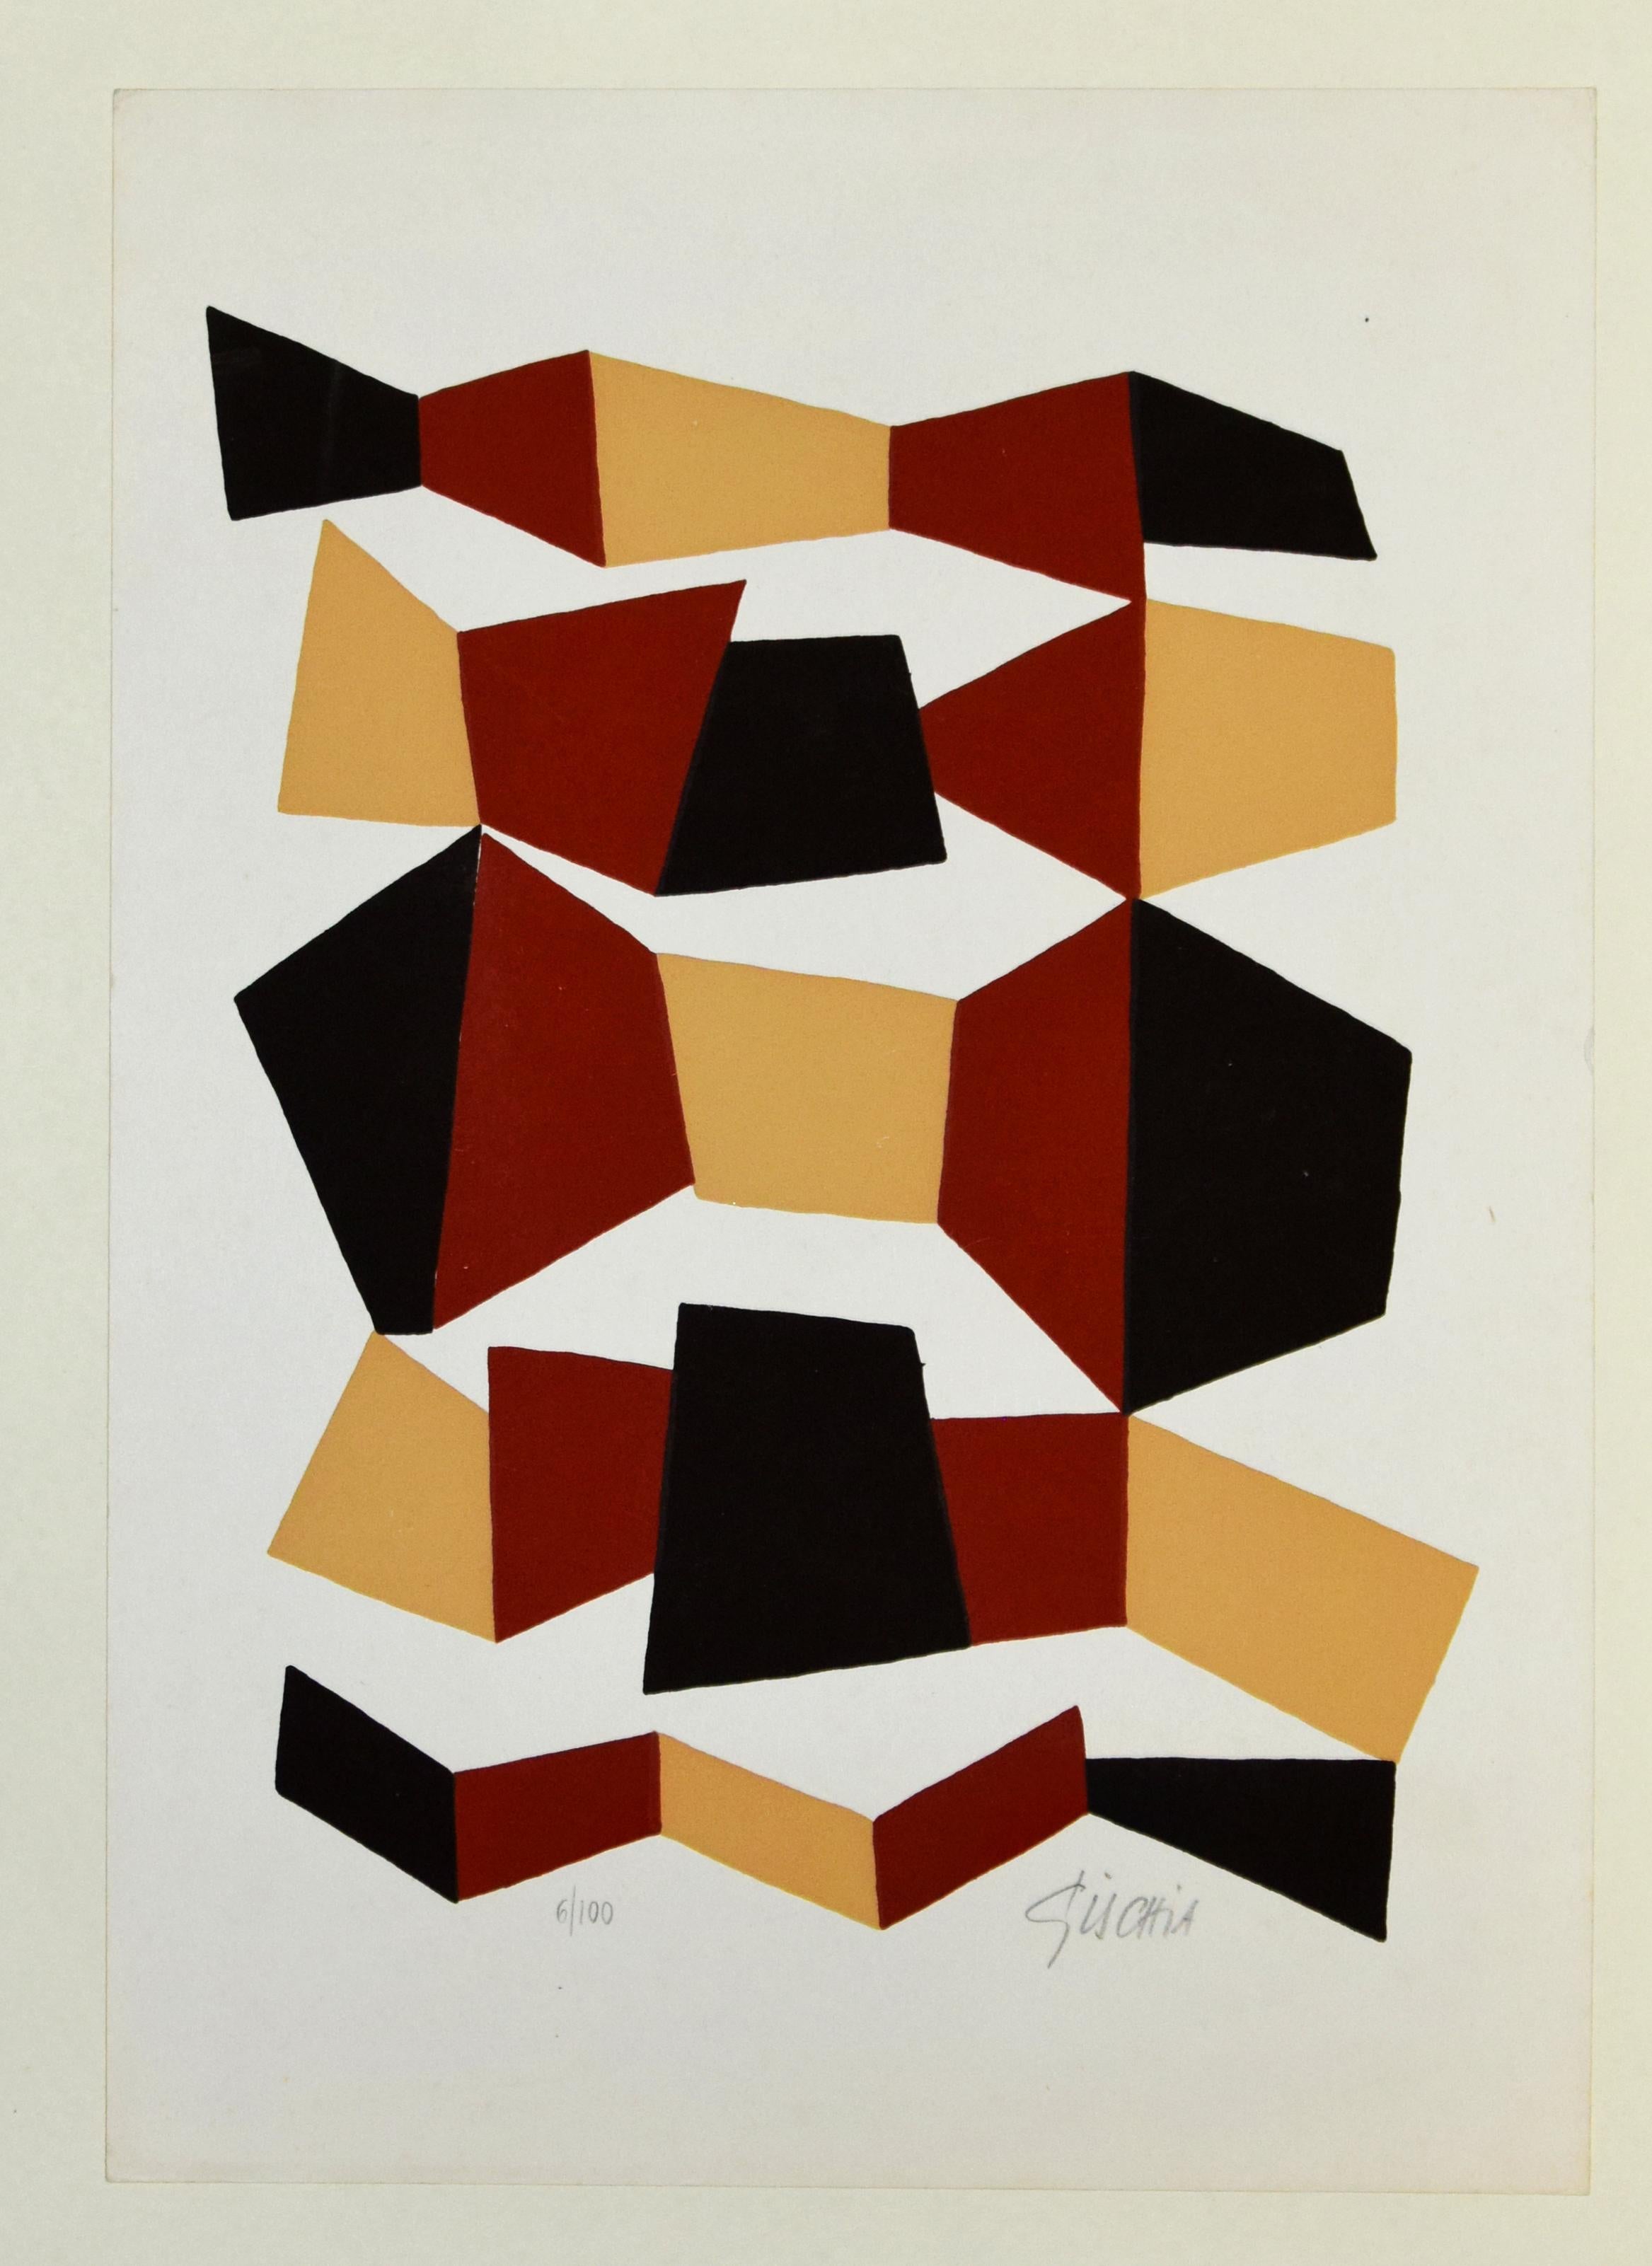 Dark Composition is an original colored screen print realized by Léon Gischia during the 20th century.

Hand-signed in pencil on the lower right. Numbered in pencil on the lower left. Edition 6/100. The serigraph is glued on paper.

Good conditions,